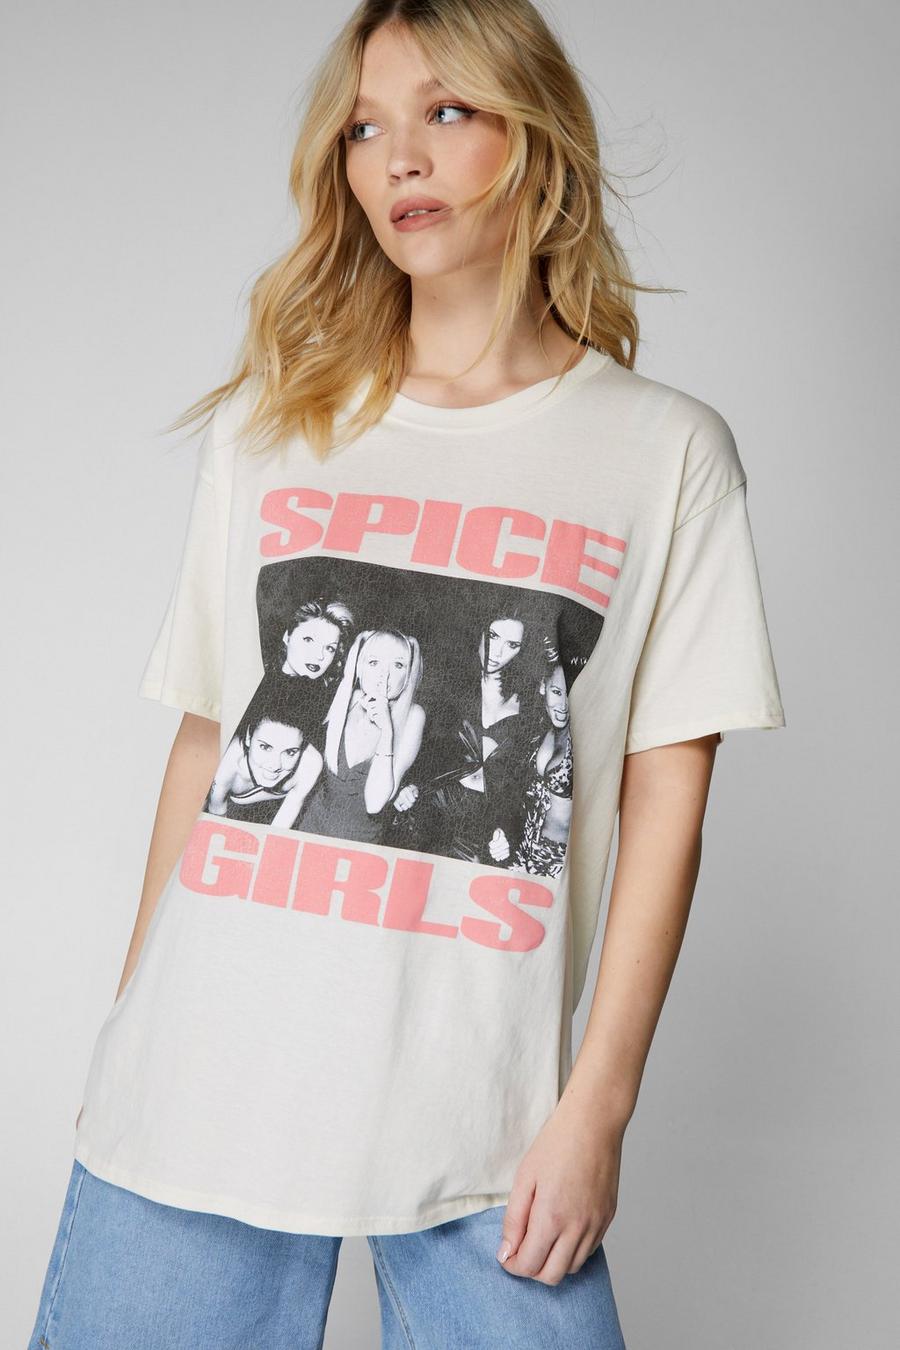 Spice Girls Oversized Graphic Band T-shirt